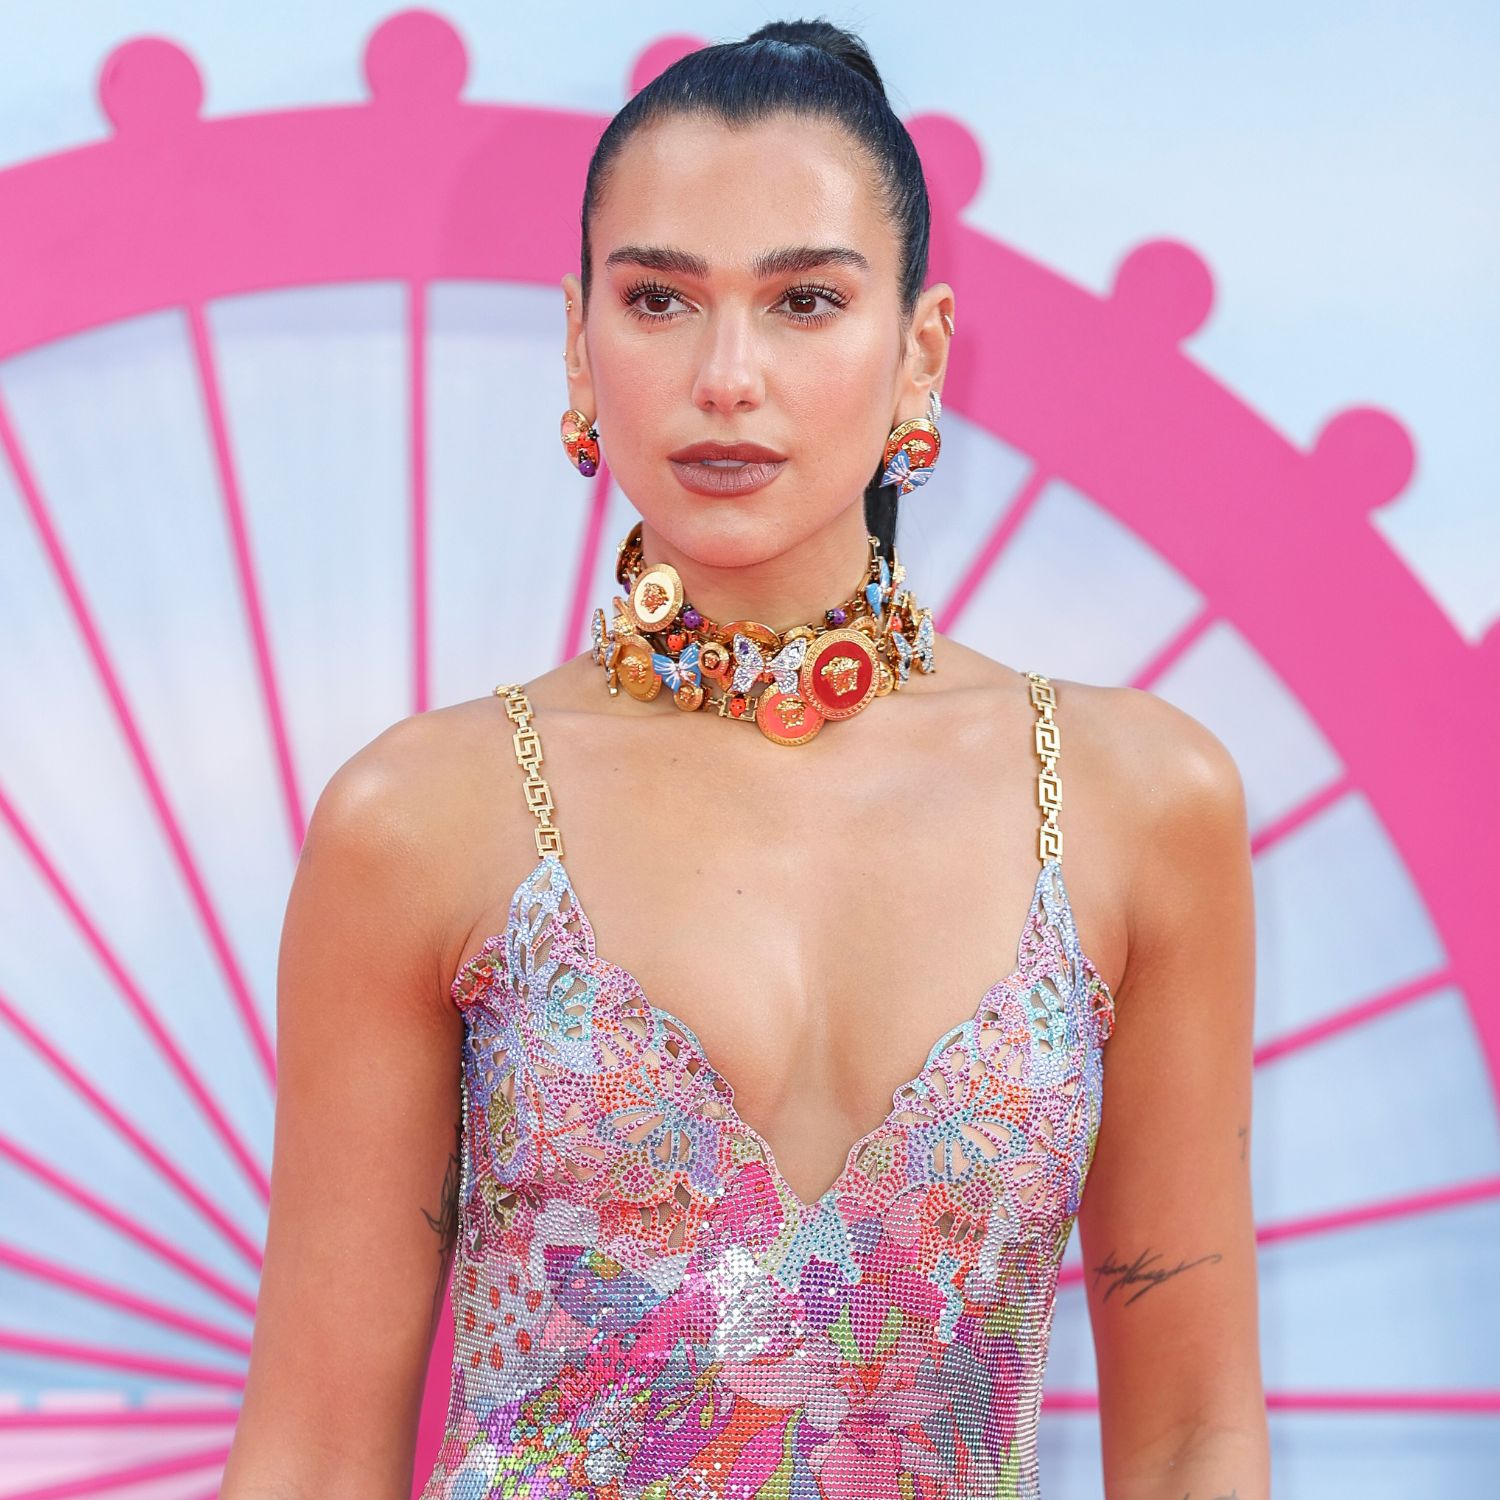  Forget mermaid Barbie, Dua Lipa’s in beach Barbie mode with these holiday looks 